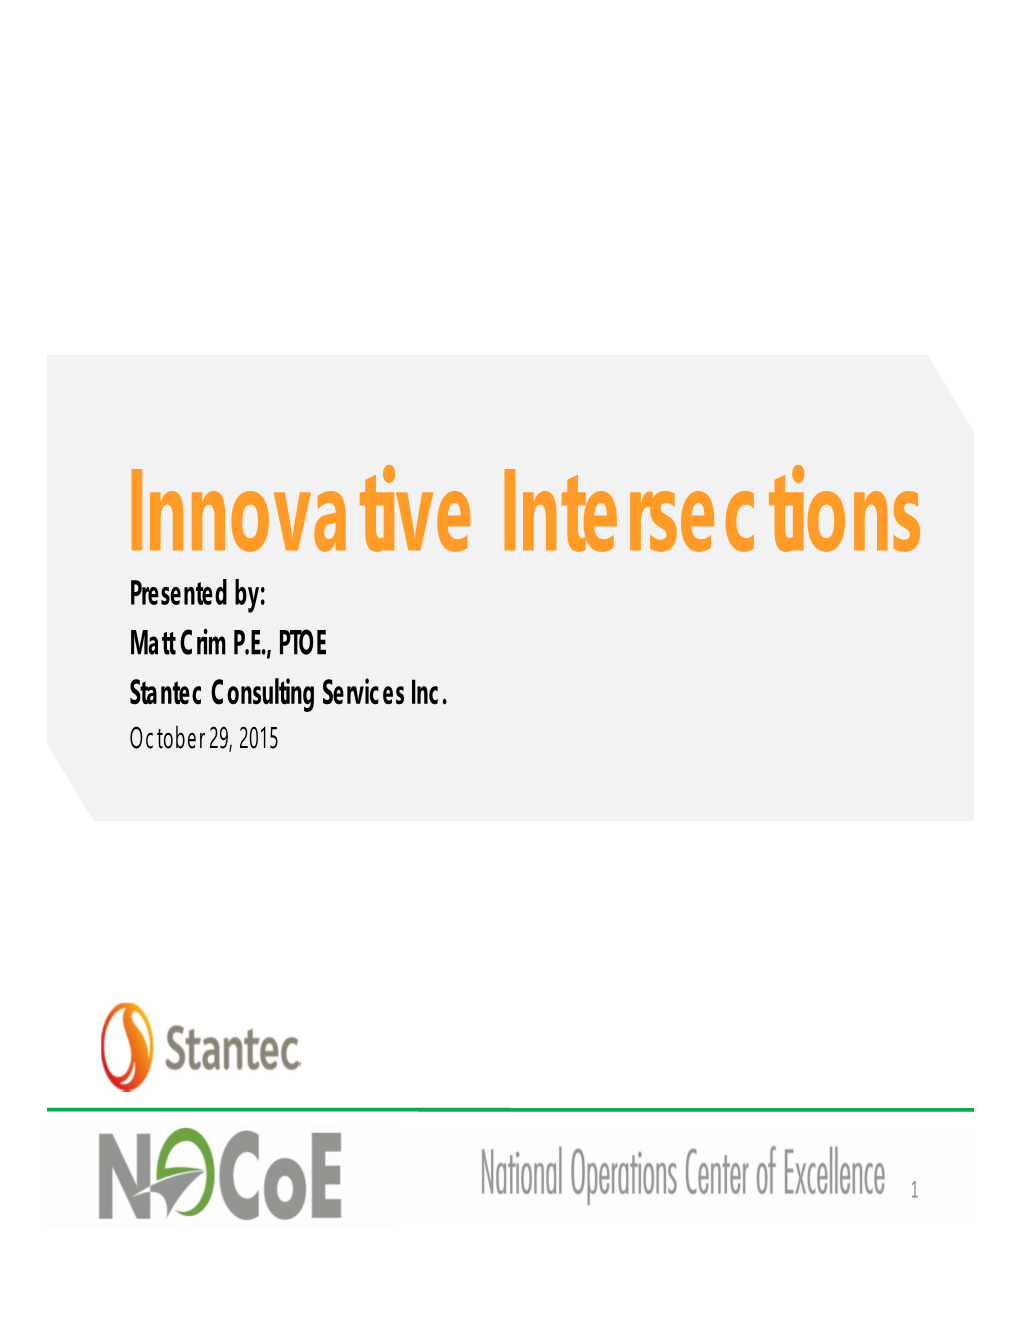 Innovative Intersections Presented By: Matt Crim P.E., PTOE Stantec Consulting Services Inc